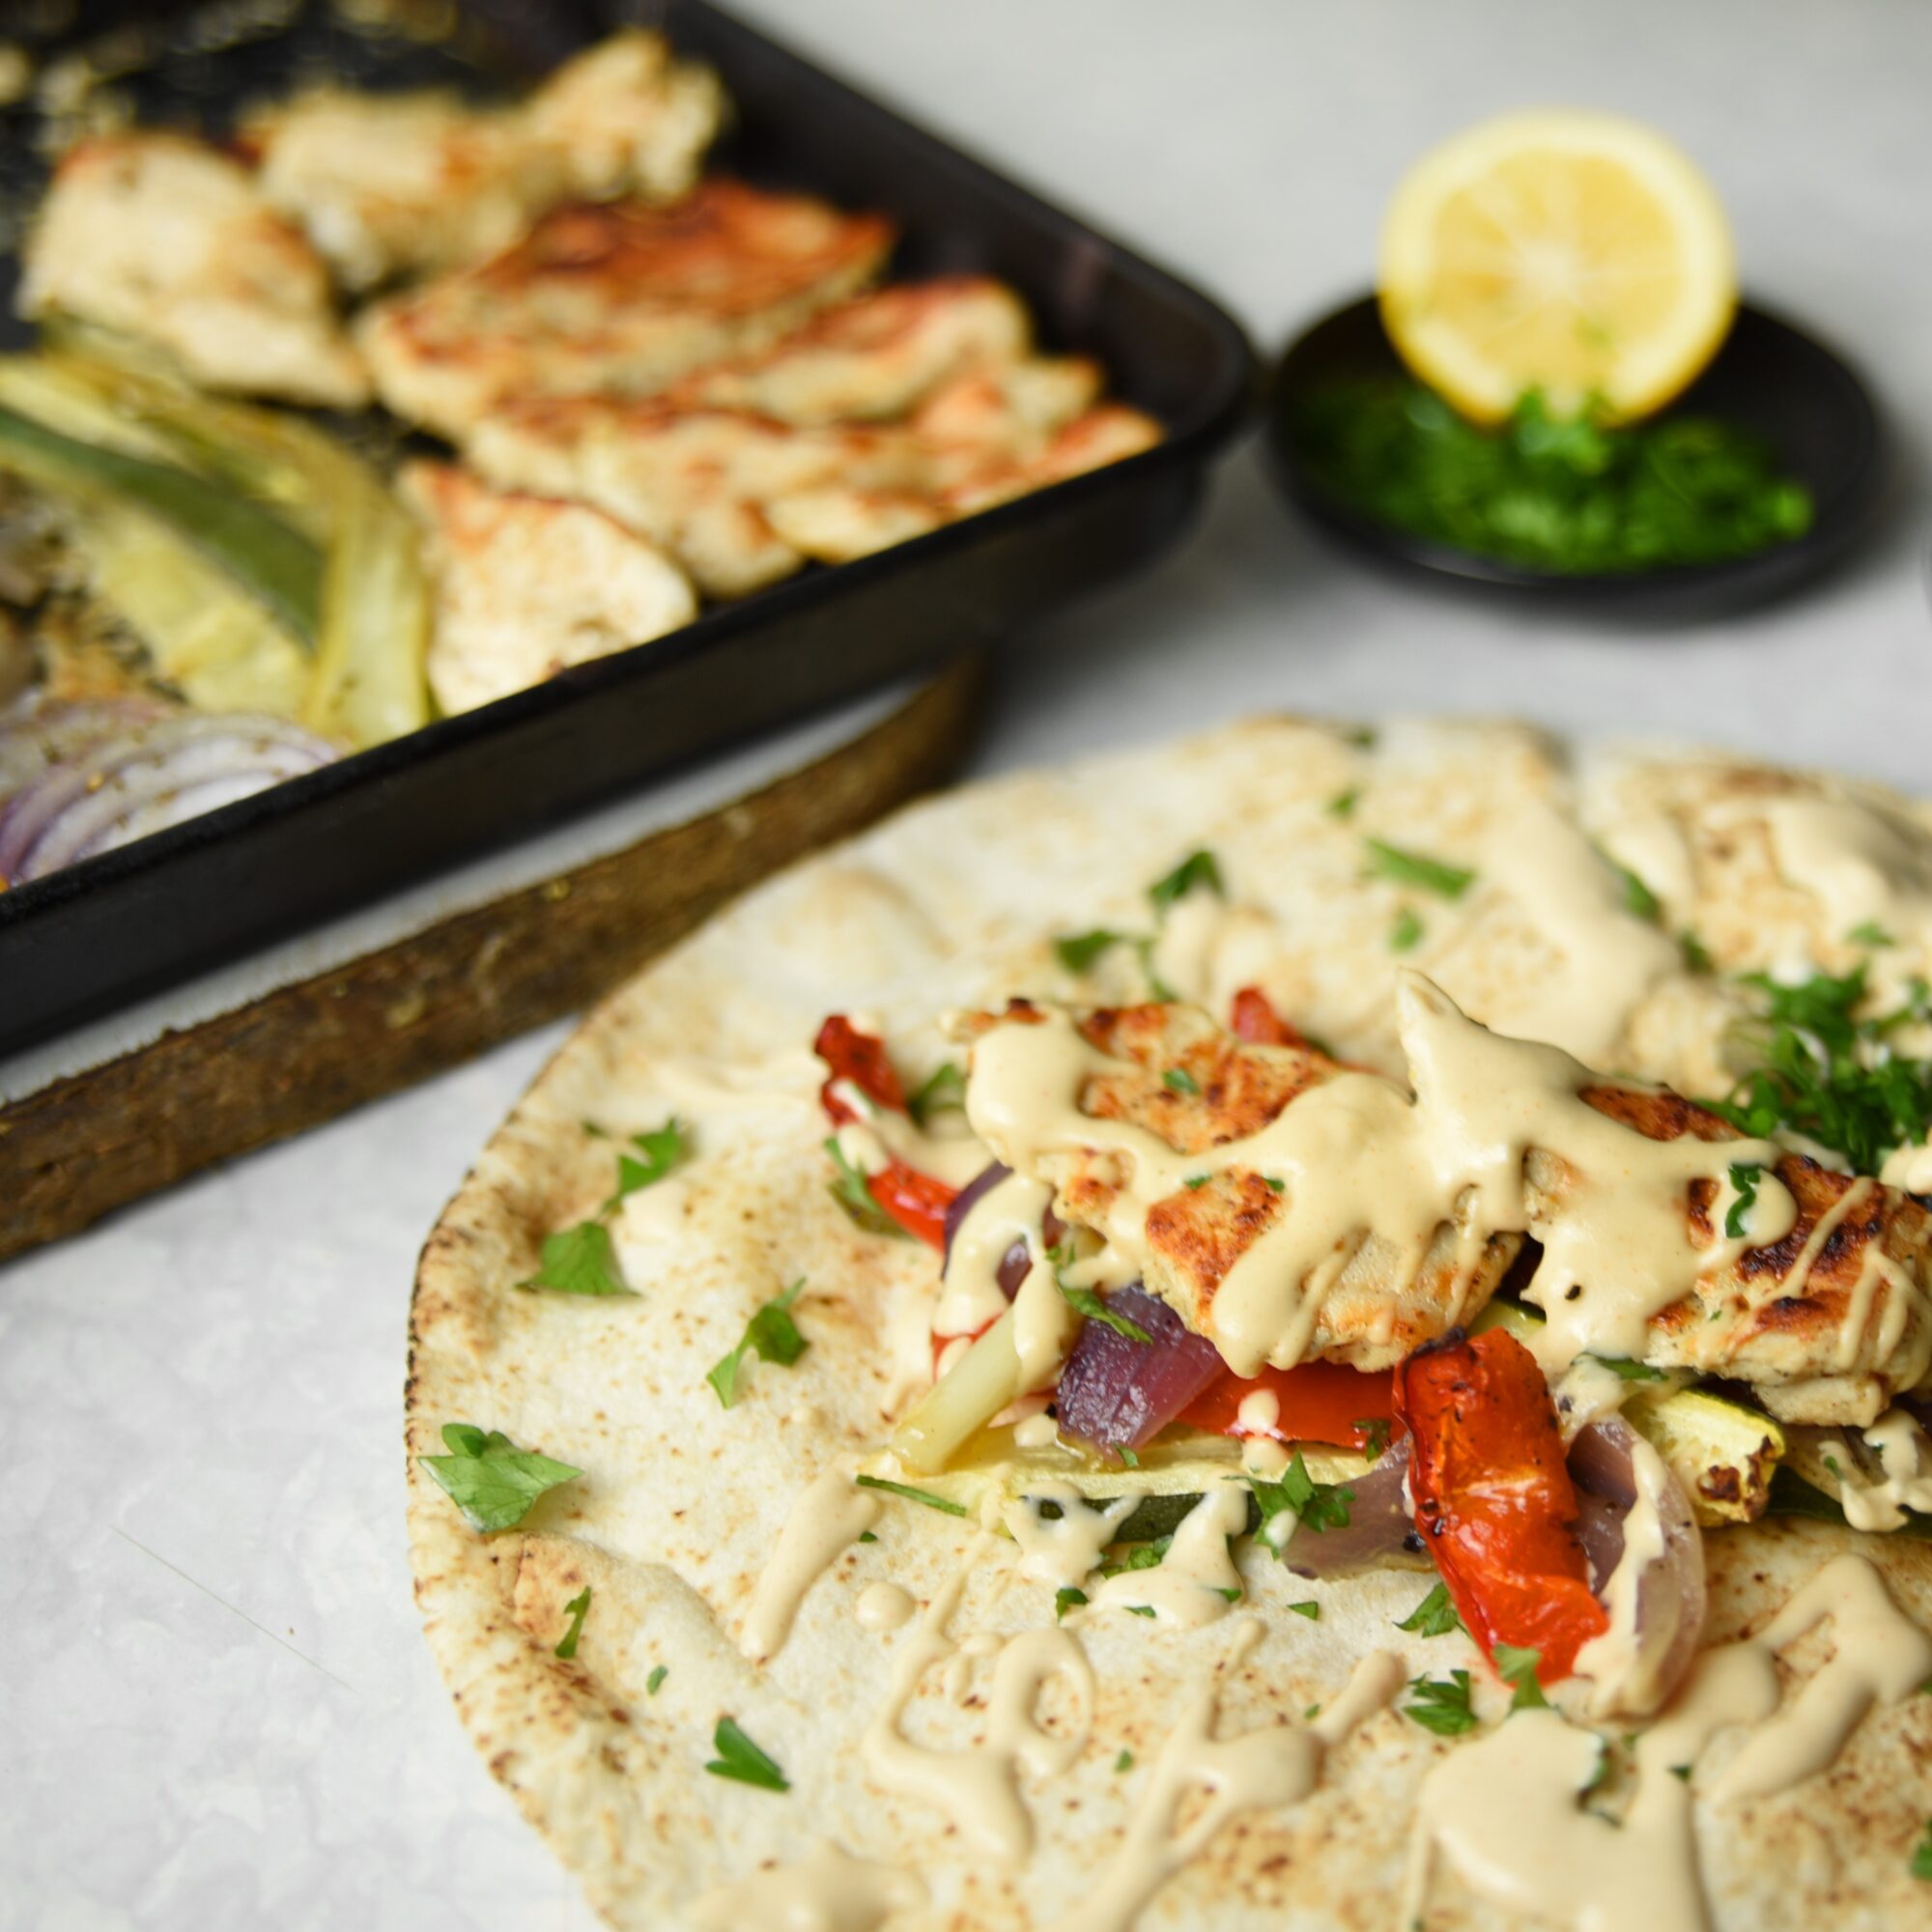 Easy Pan Sheet Chicken Shawarma is a quick and delicious oven baked family meal